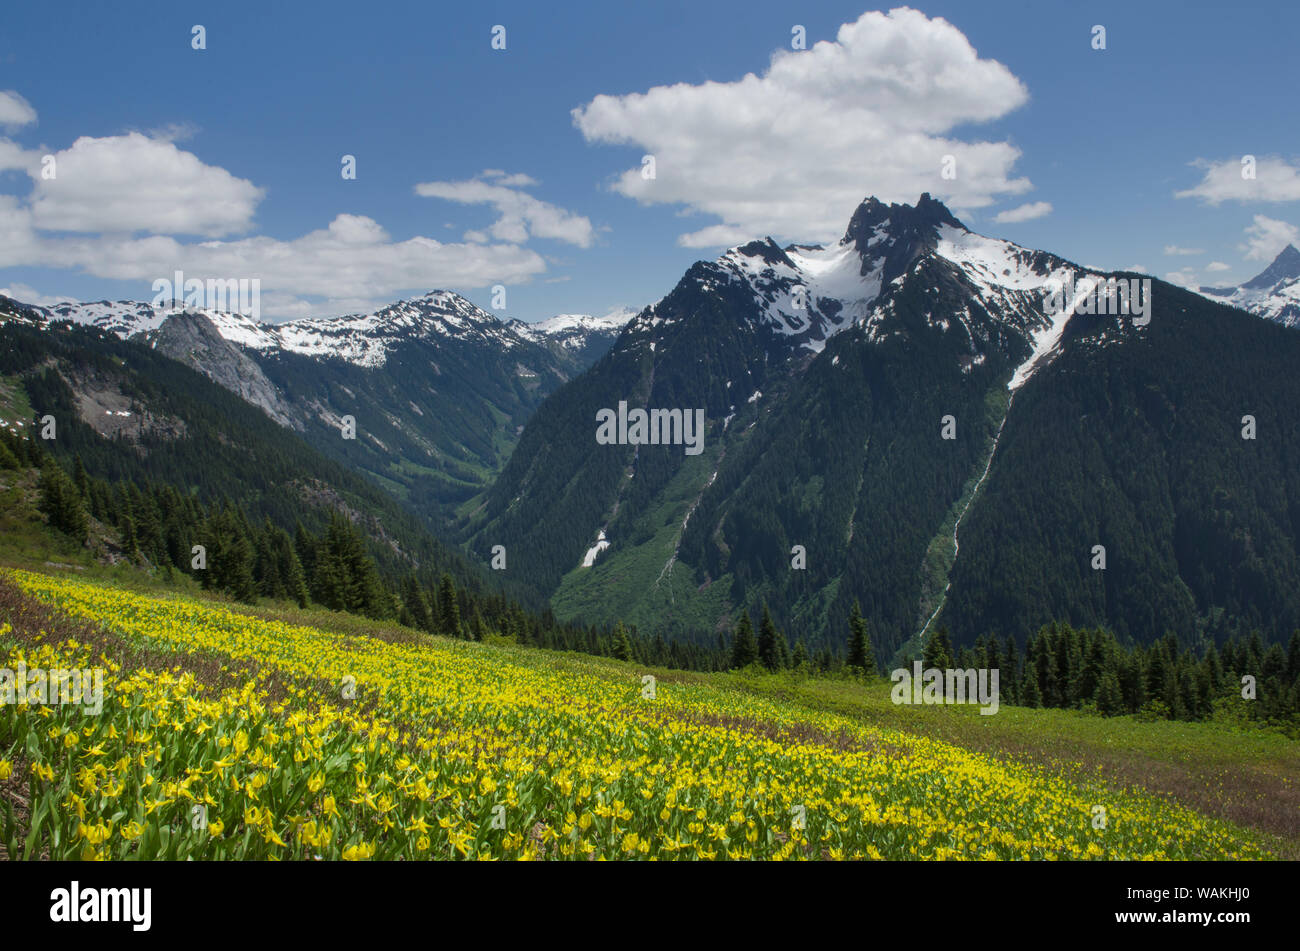 Mount Sefrit and Ruth Creek Valley, North Cascades, Washington State. Yellow Avalanche Lilies (Erythronium grandiflorum) are in the foreground. Stock Photo